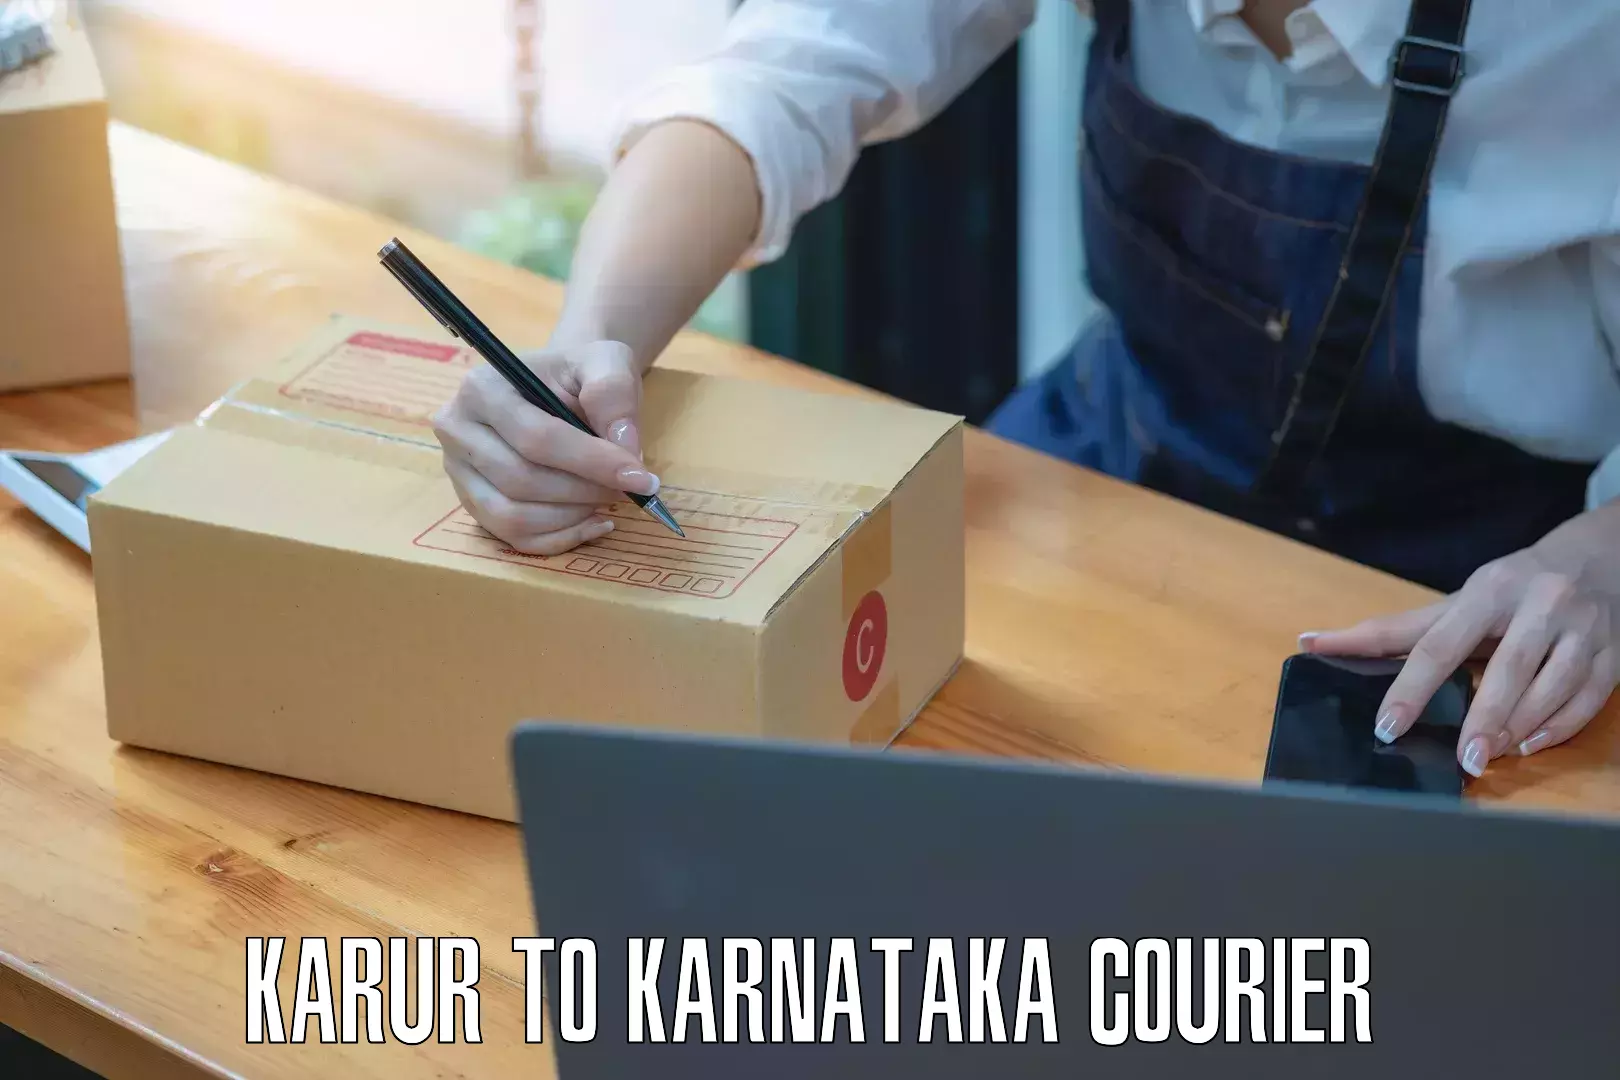 24/7 courier service in Karur to Kollegal